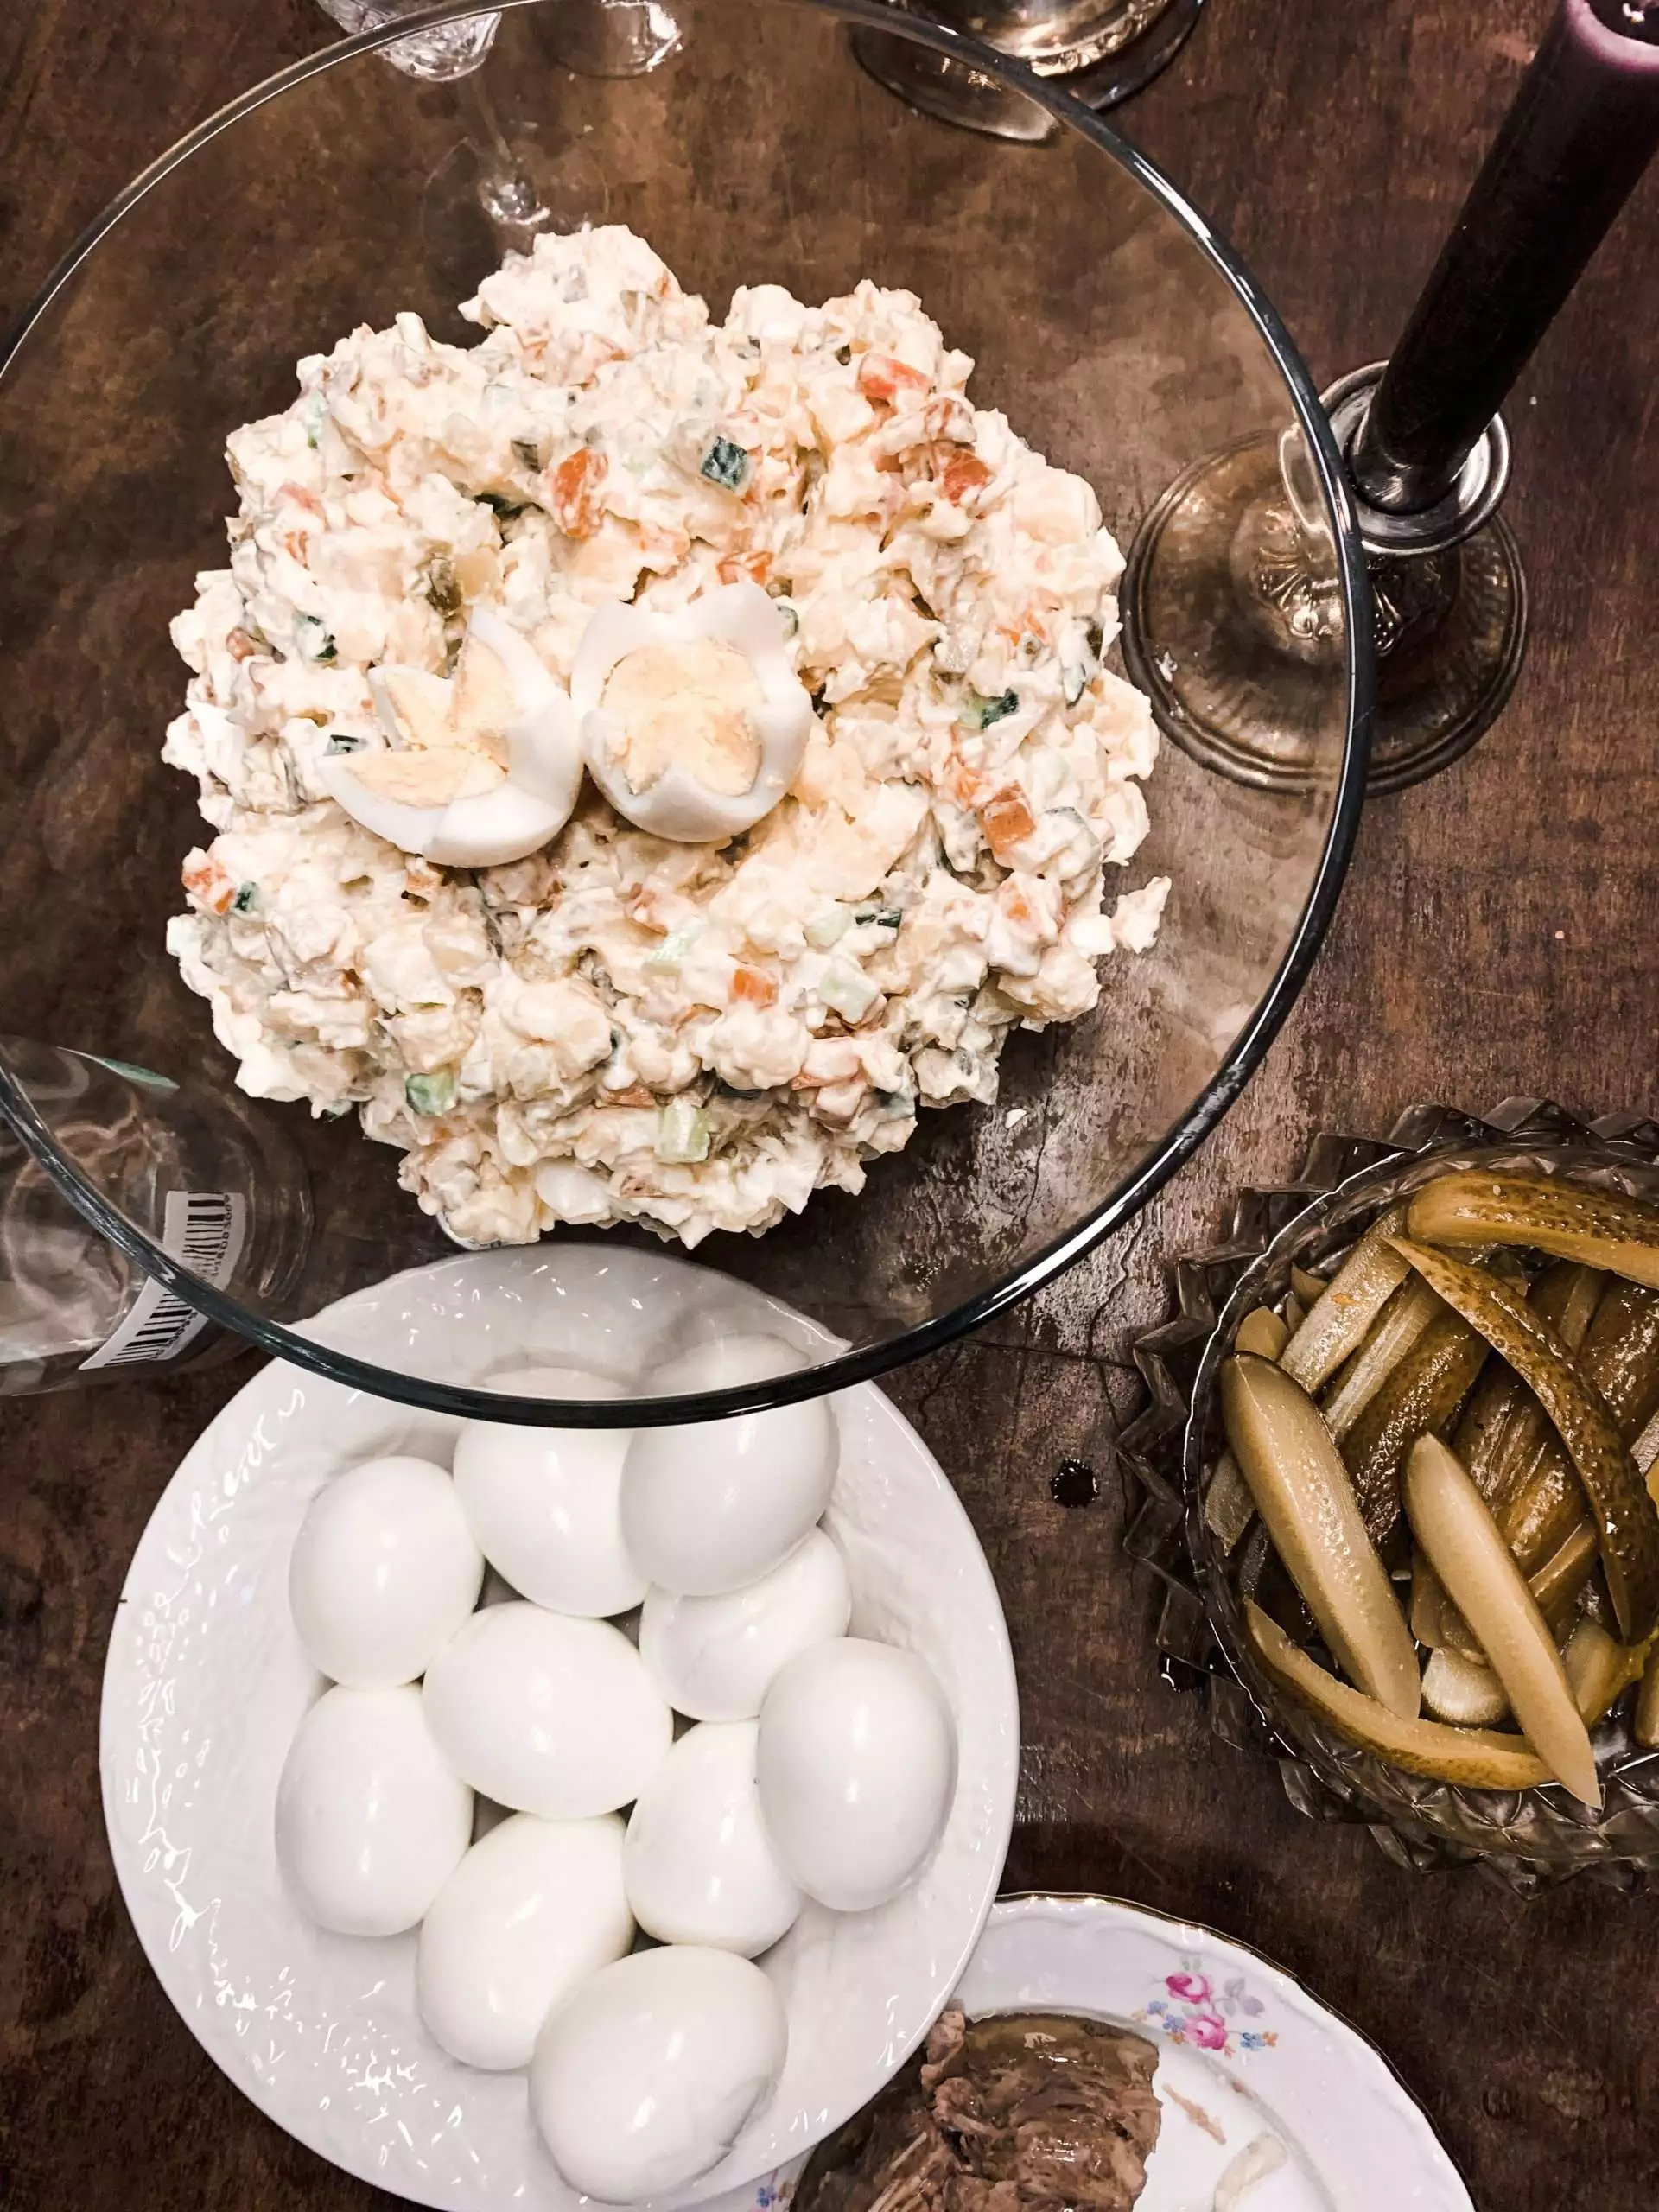 12 Easy Egg Salad Recipes You Need To Try! 3